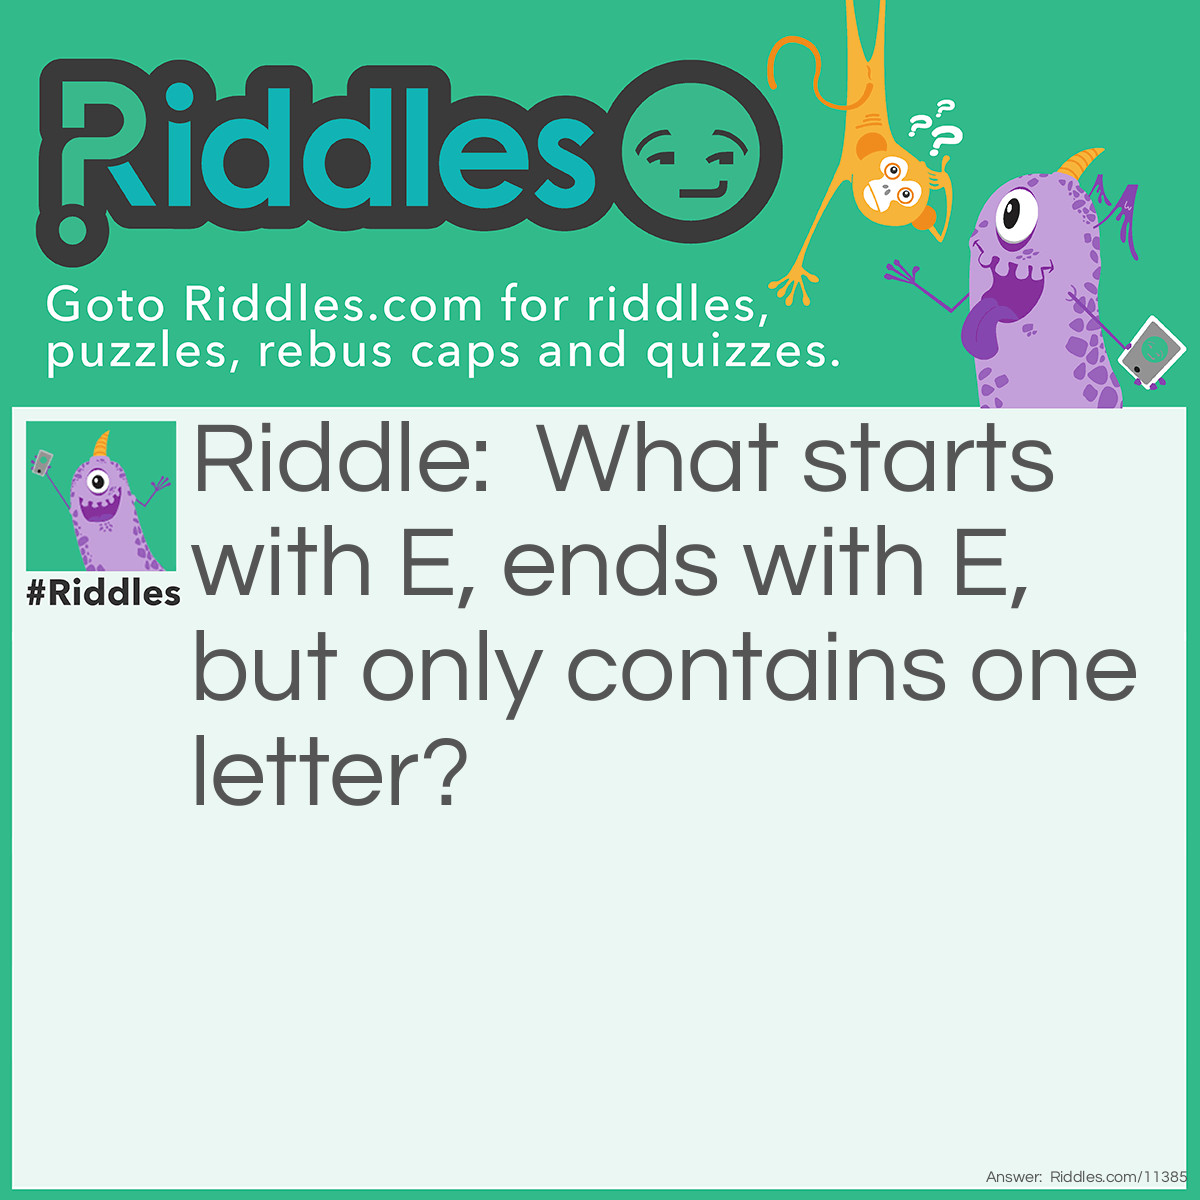 Riddle: What starts with E, ends with E, but only contains one letter? Answer: It's an envelope! You have to think about it literally; an "envelope" begins with E, ends with E, and only contains one letter–the "letter" is the letter you type/write. Some people believe it could be "eye" or "Eve" or "ewe", however, those things contain THREE letters (yes, you have to count the E's in each word because E is also a letter).